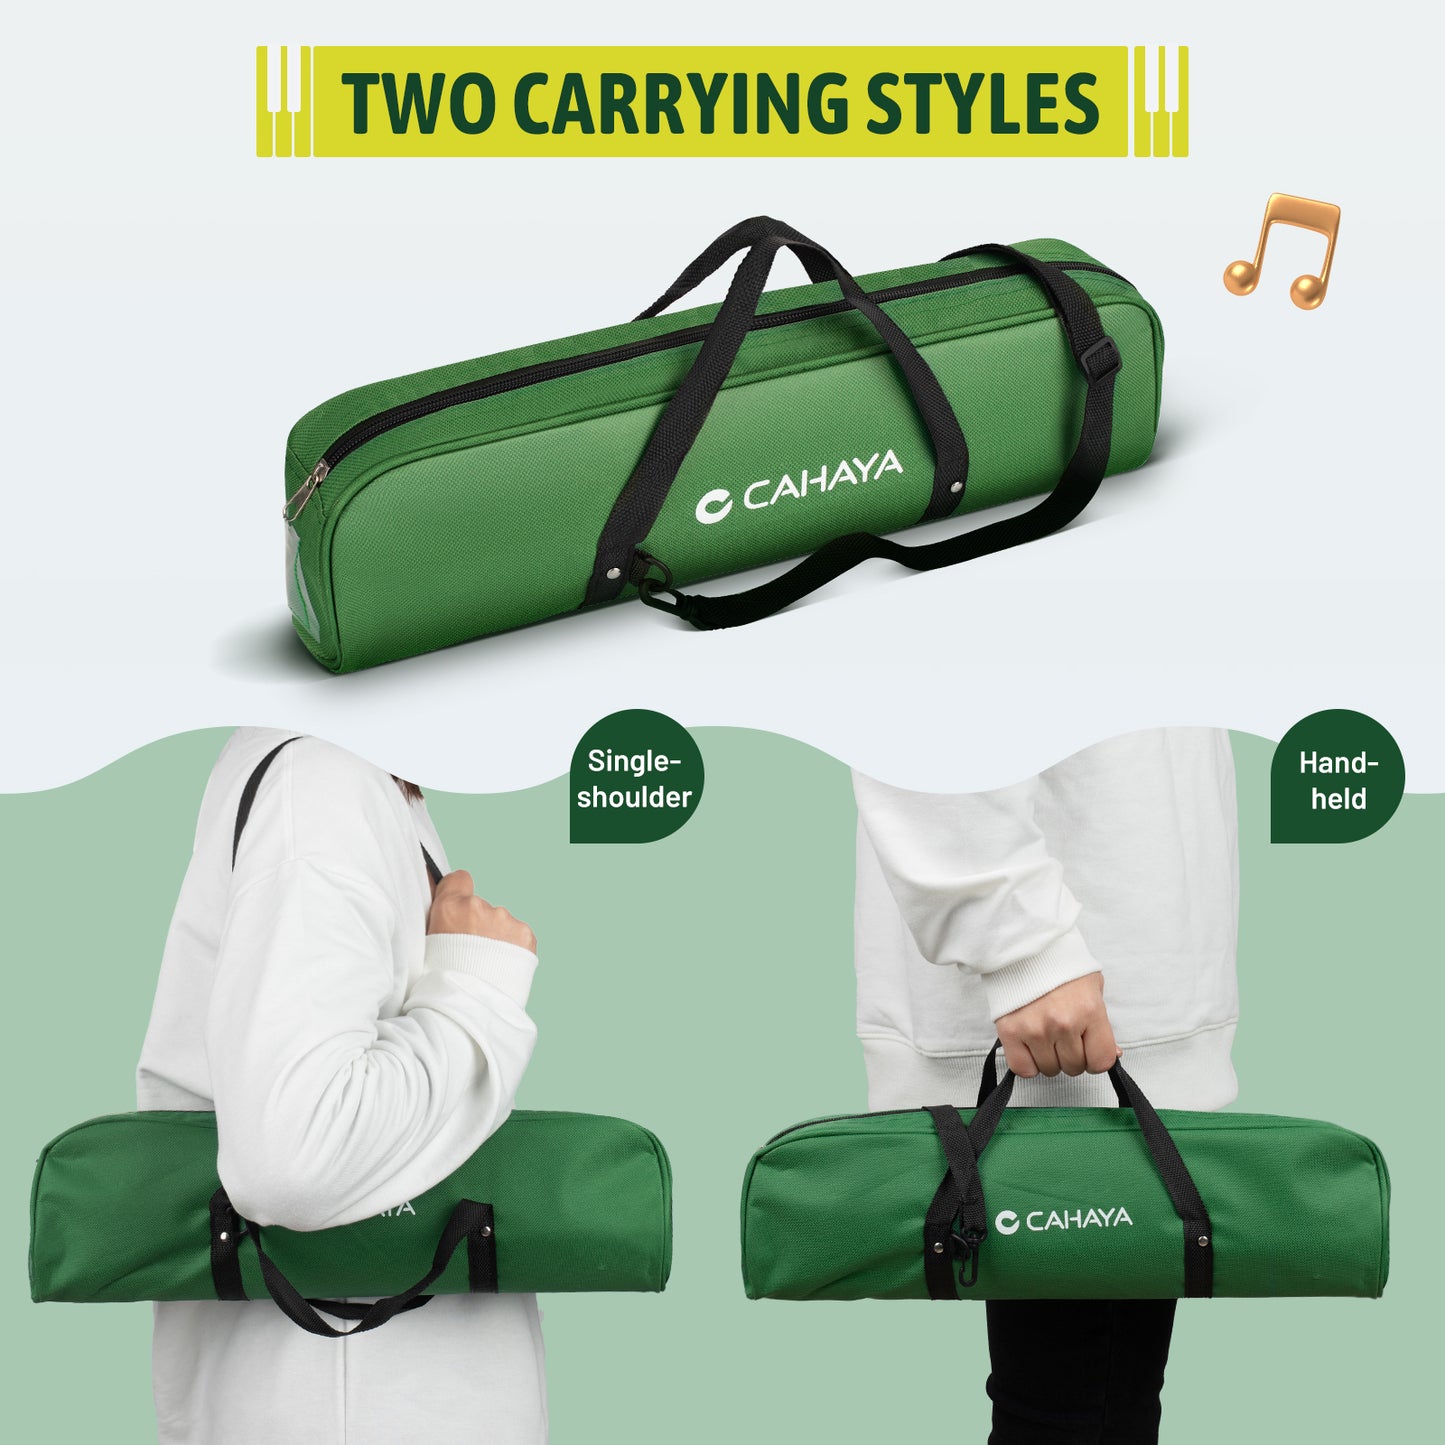 Melodica Double Sets 32 Key Green